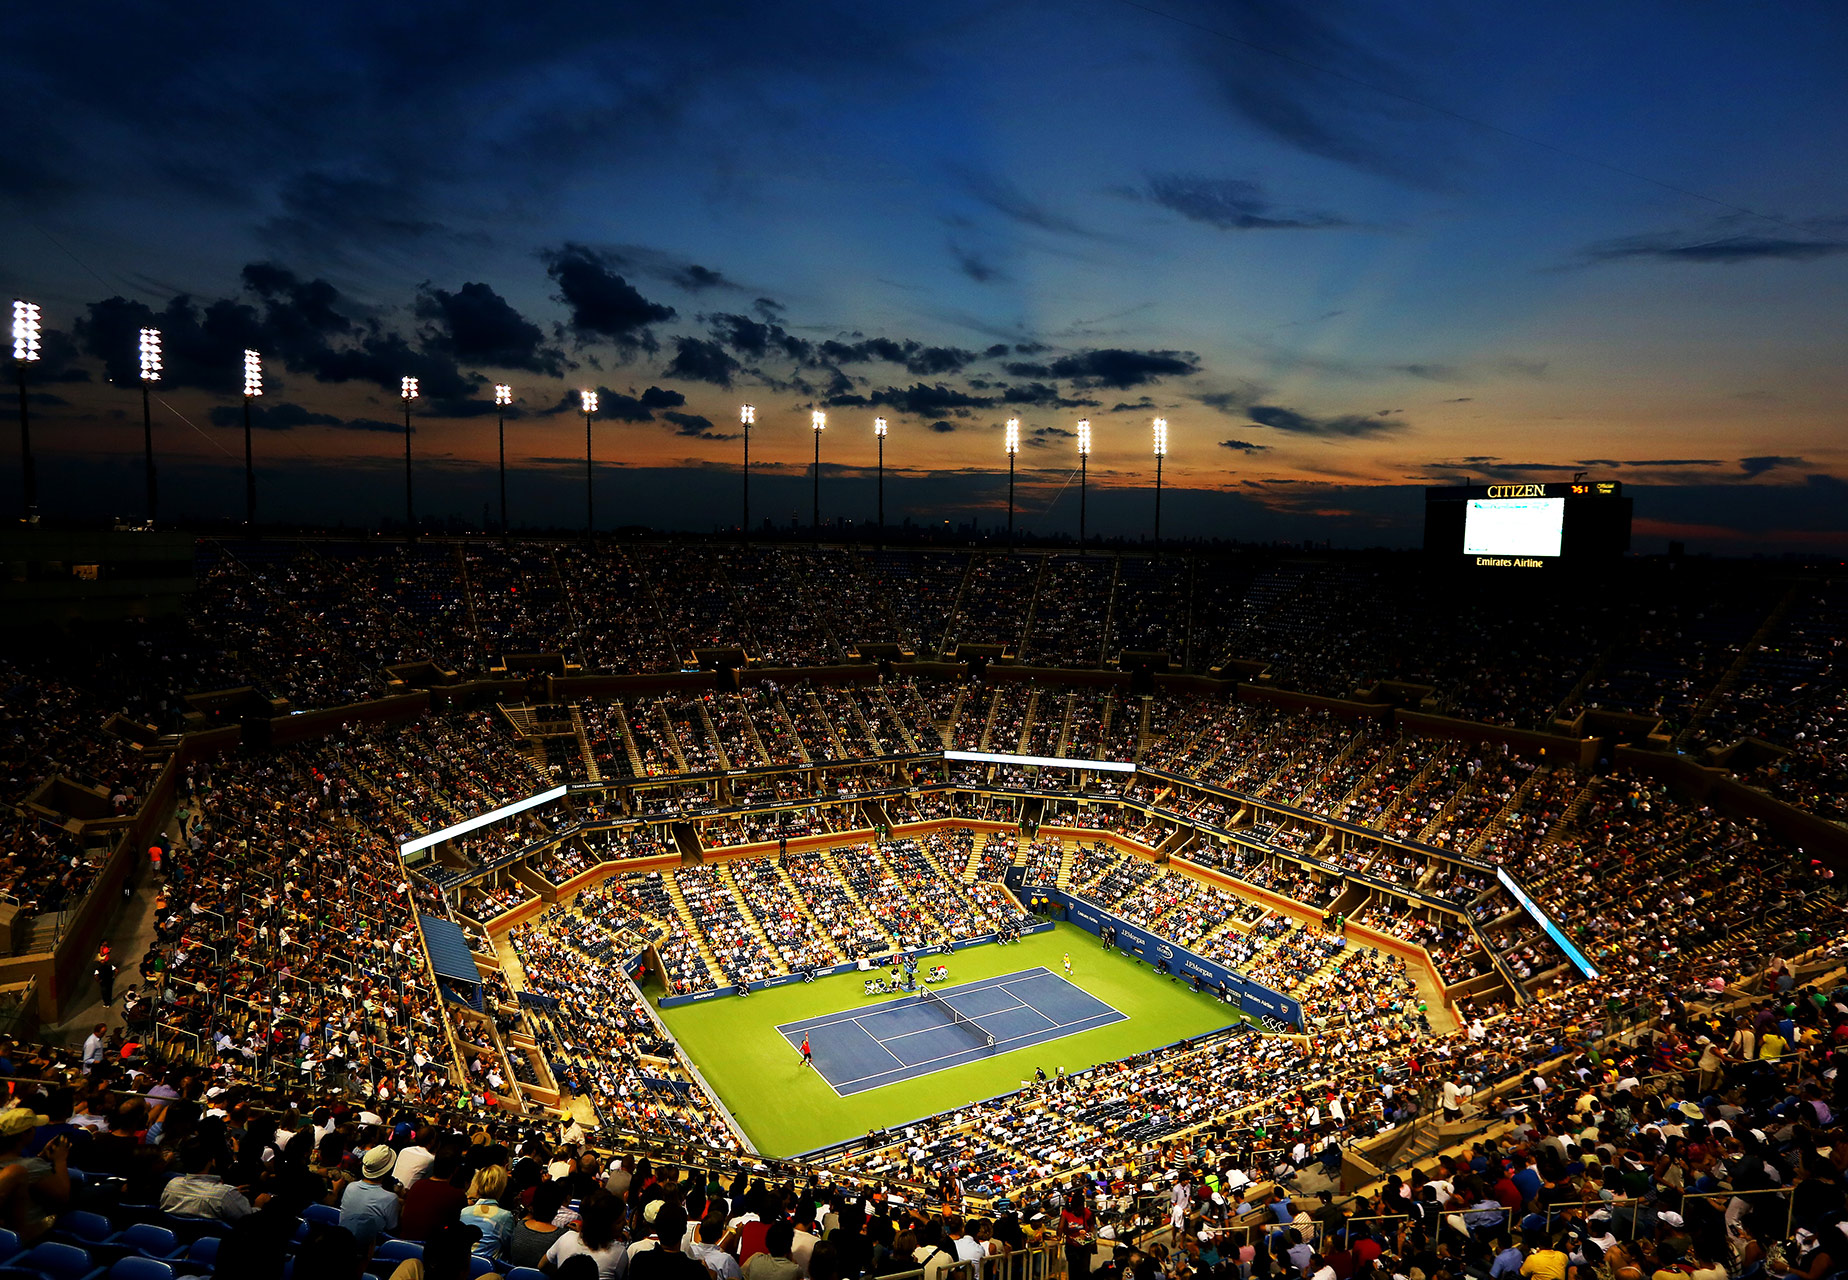 US Open-US Open Tennis Championship: Session 6 - Men's/Women's 2nd Round tickets price and order